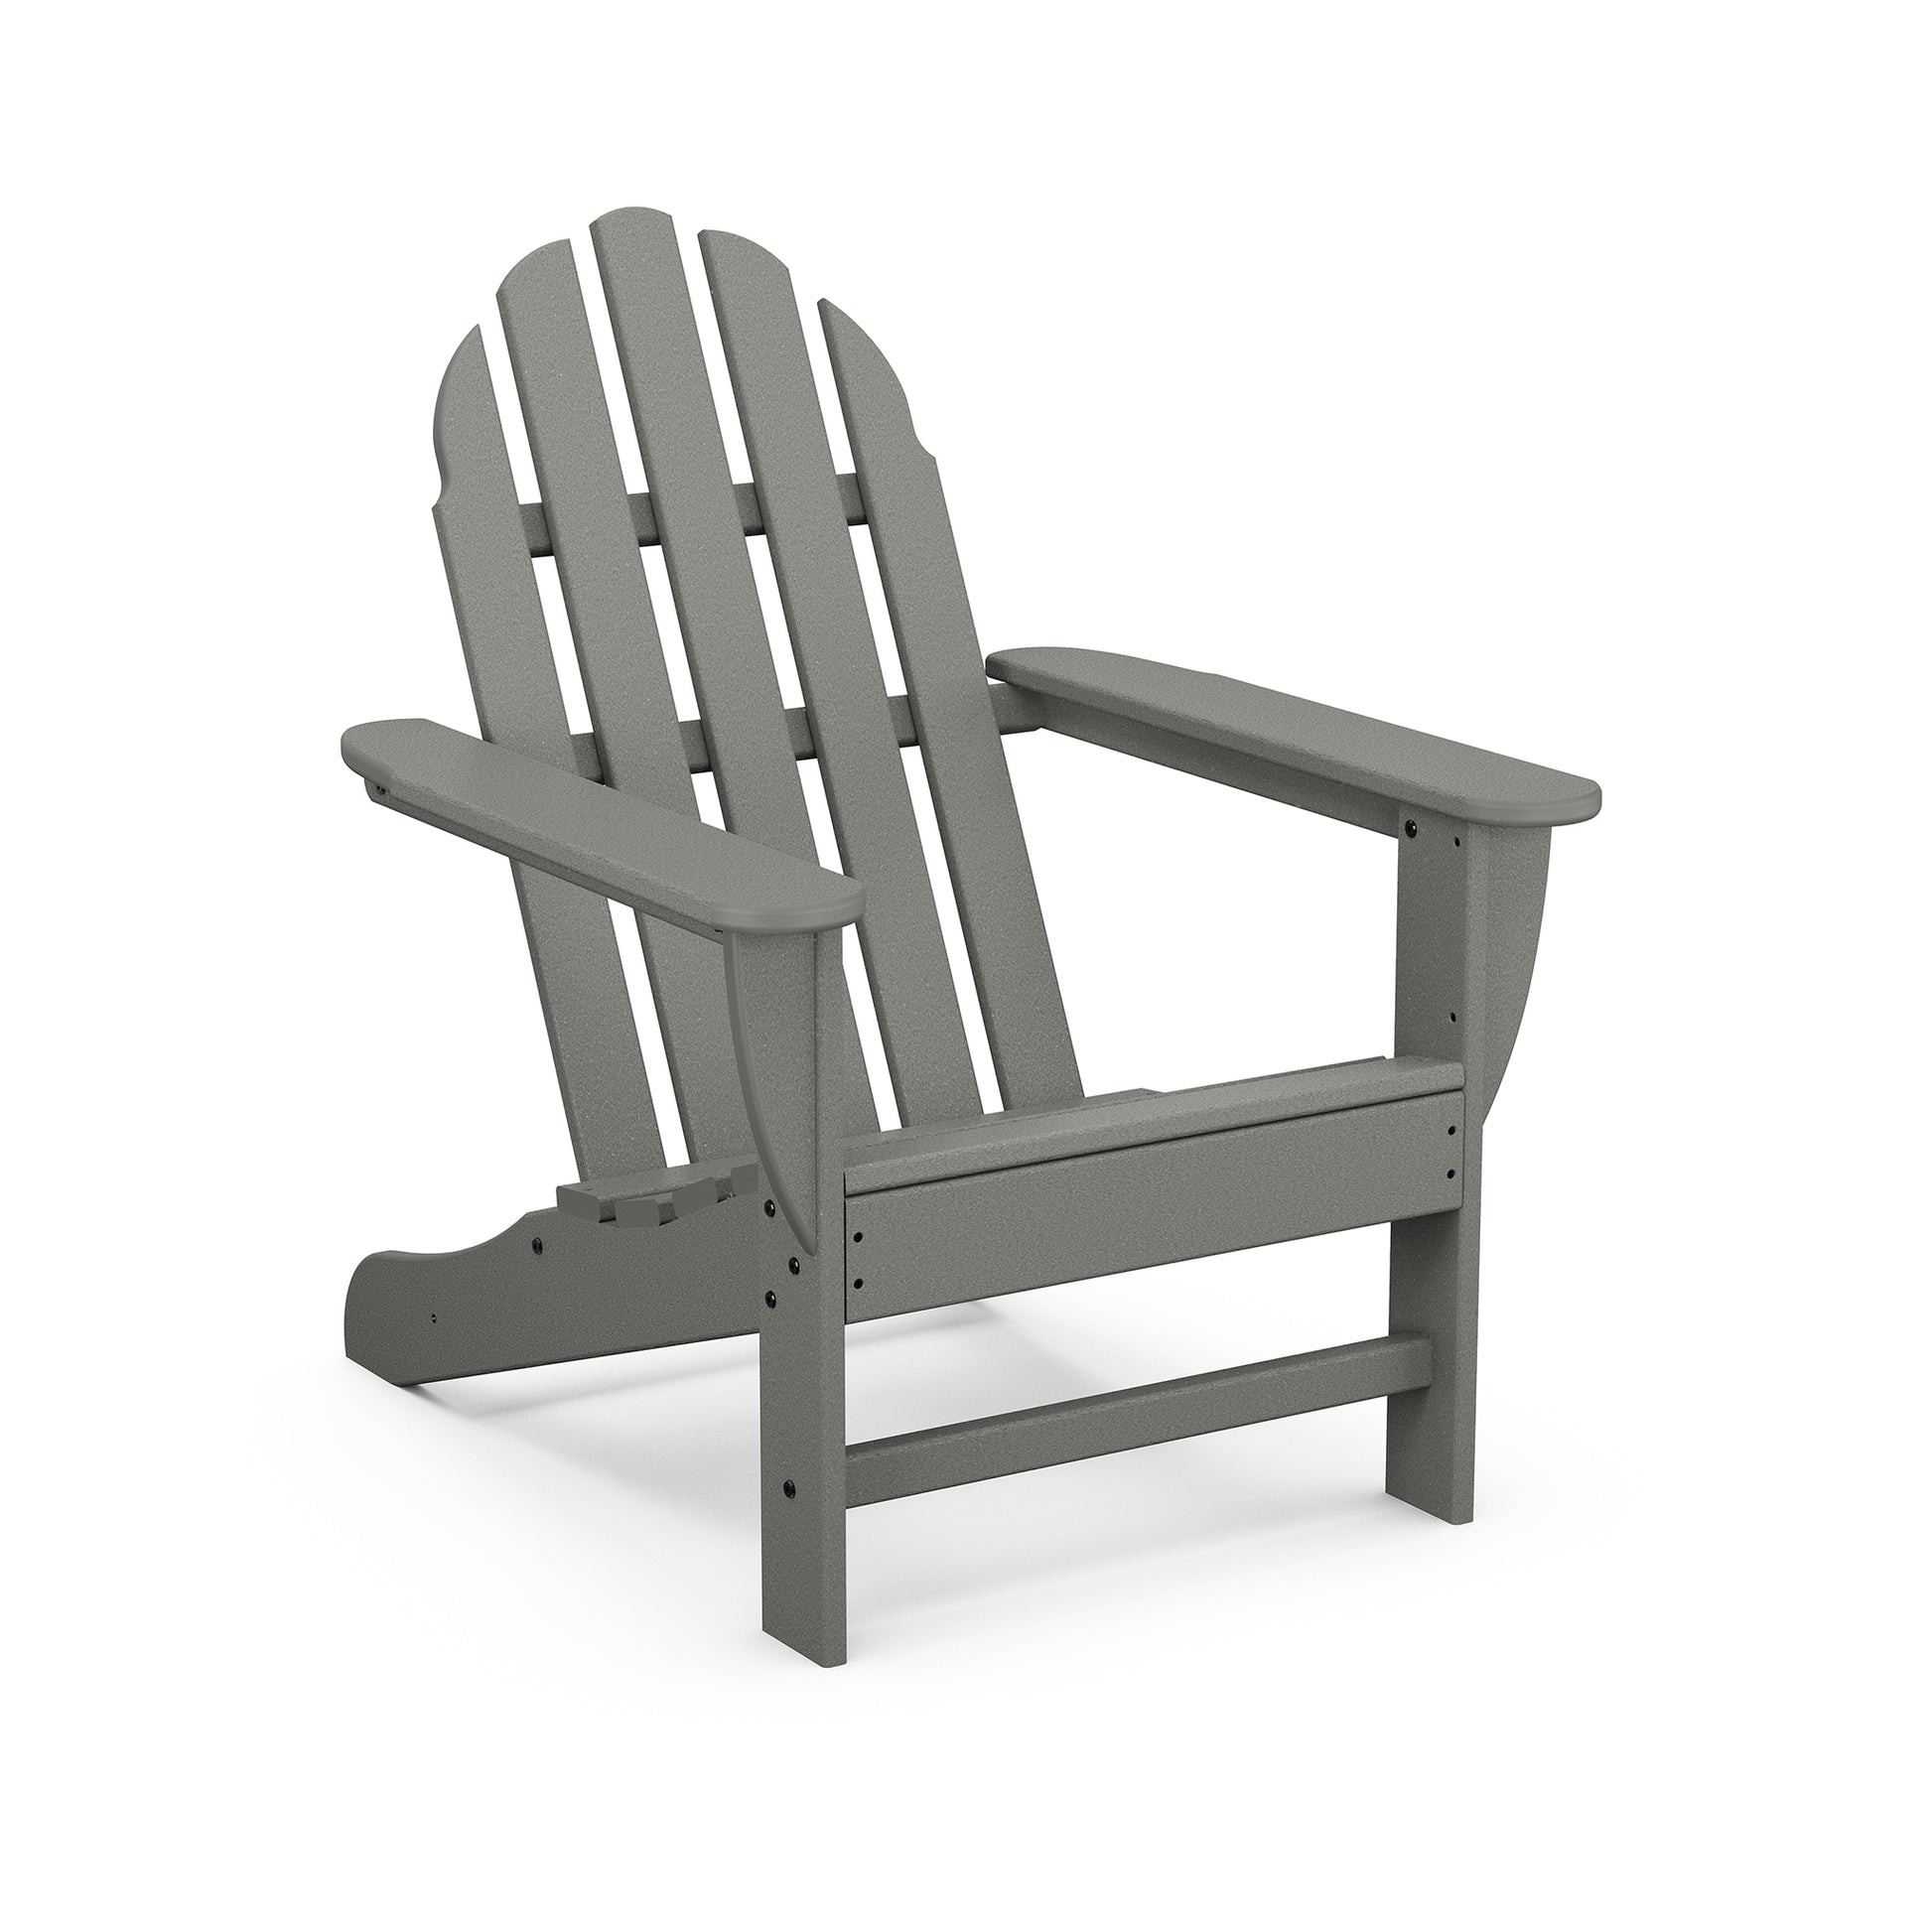 A gray POLYWOOD Classic Adirondack Chair, featuring a slatted design and wide armrests, set against a white background.